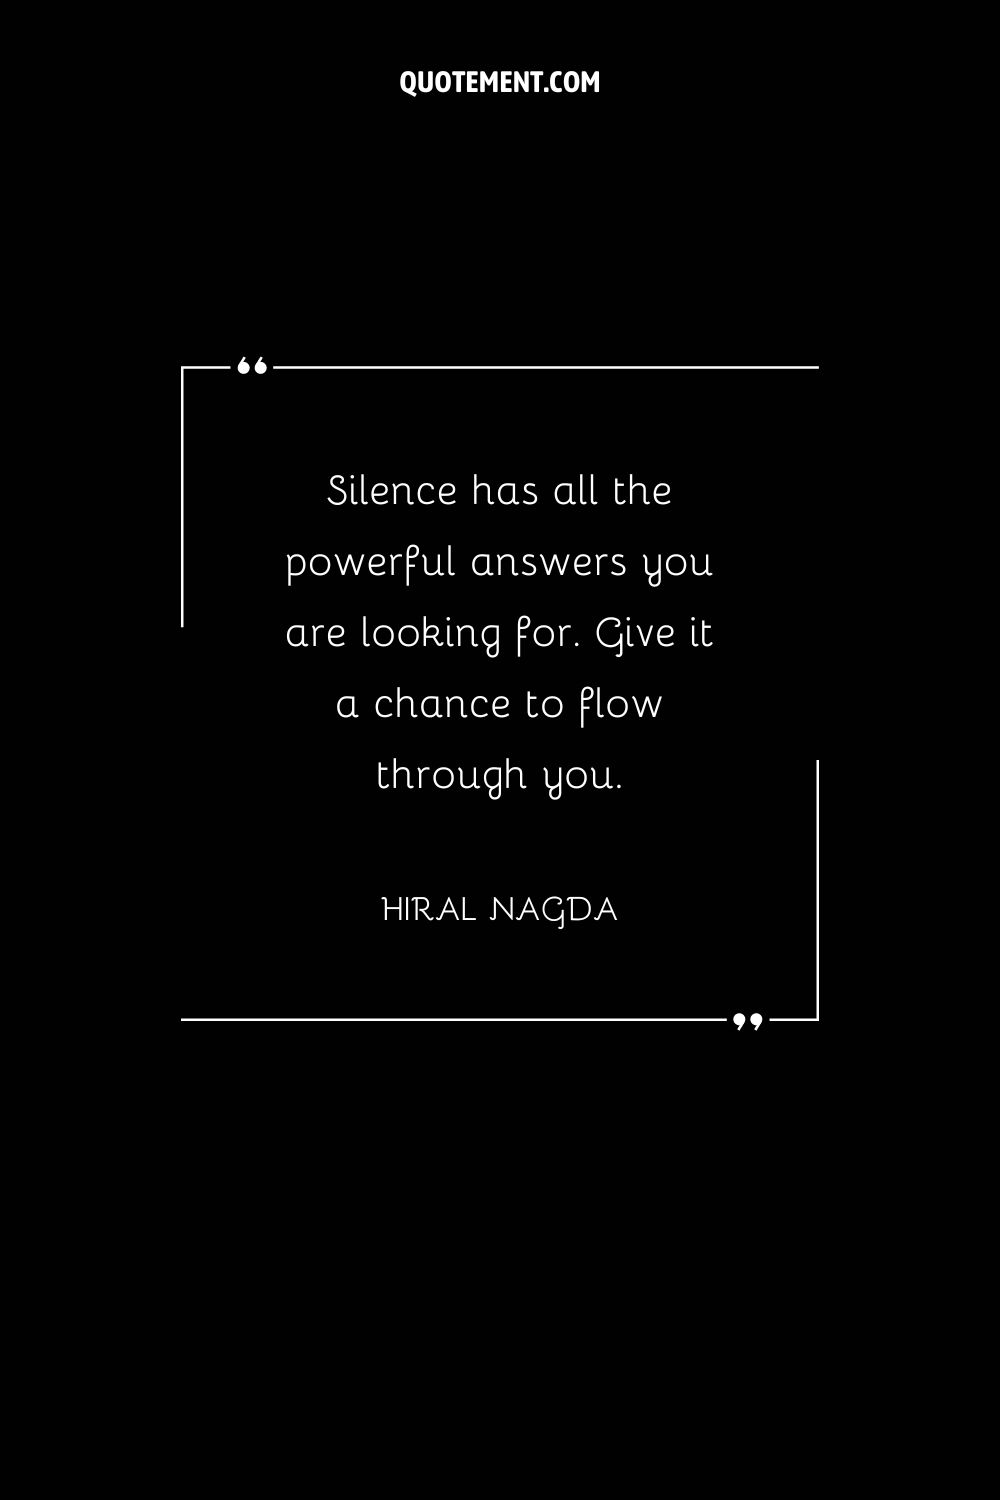 Silence has all the powerful answers you are looking for